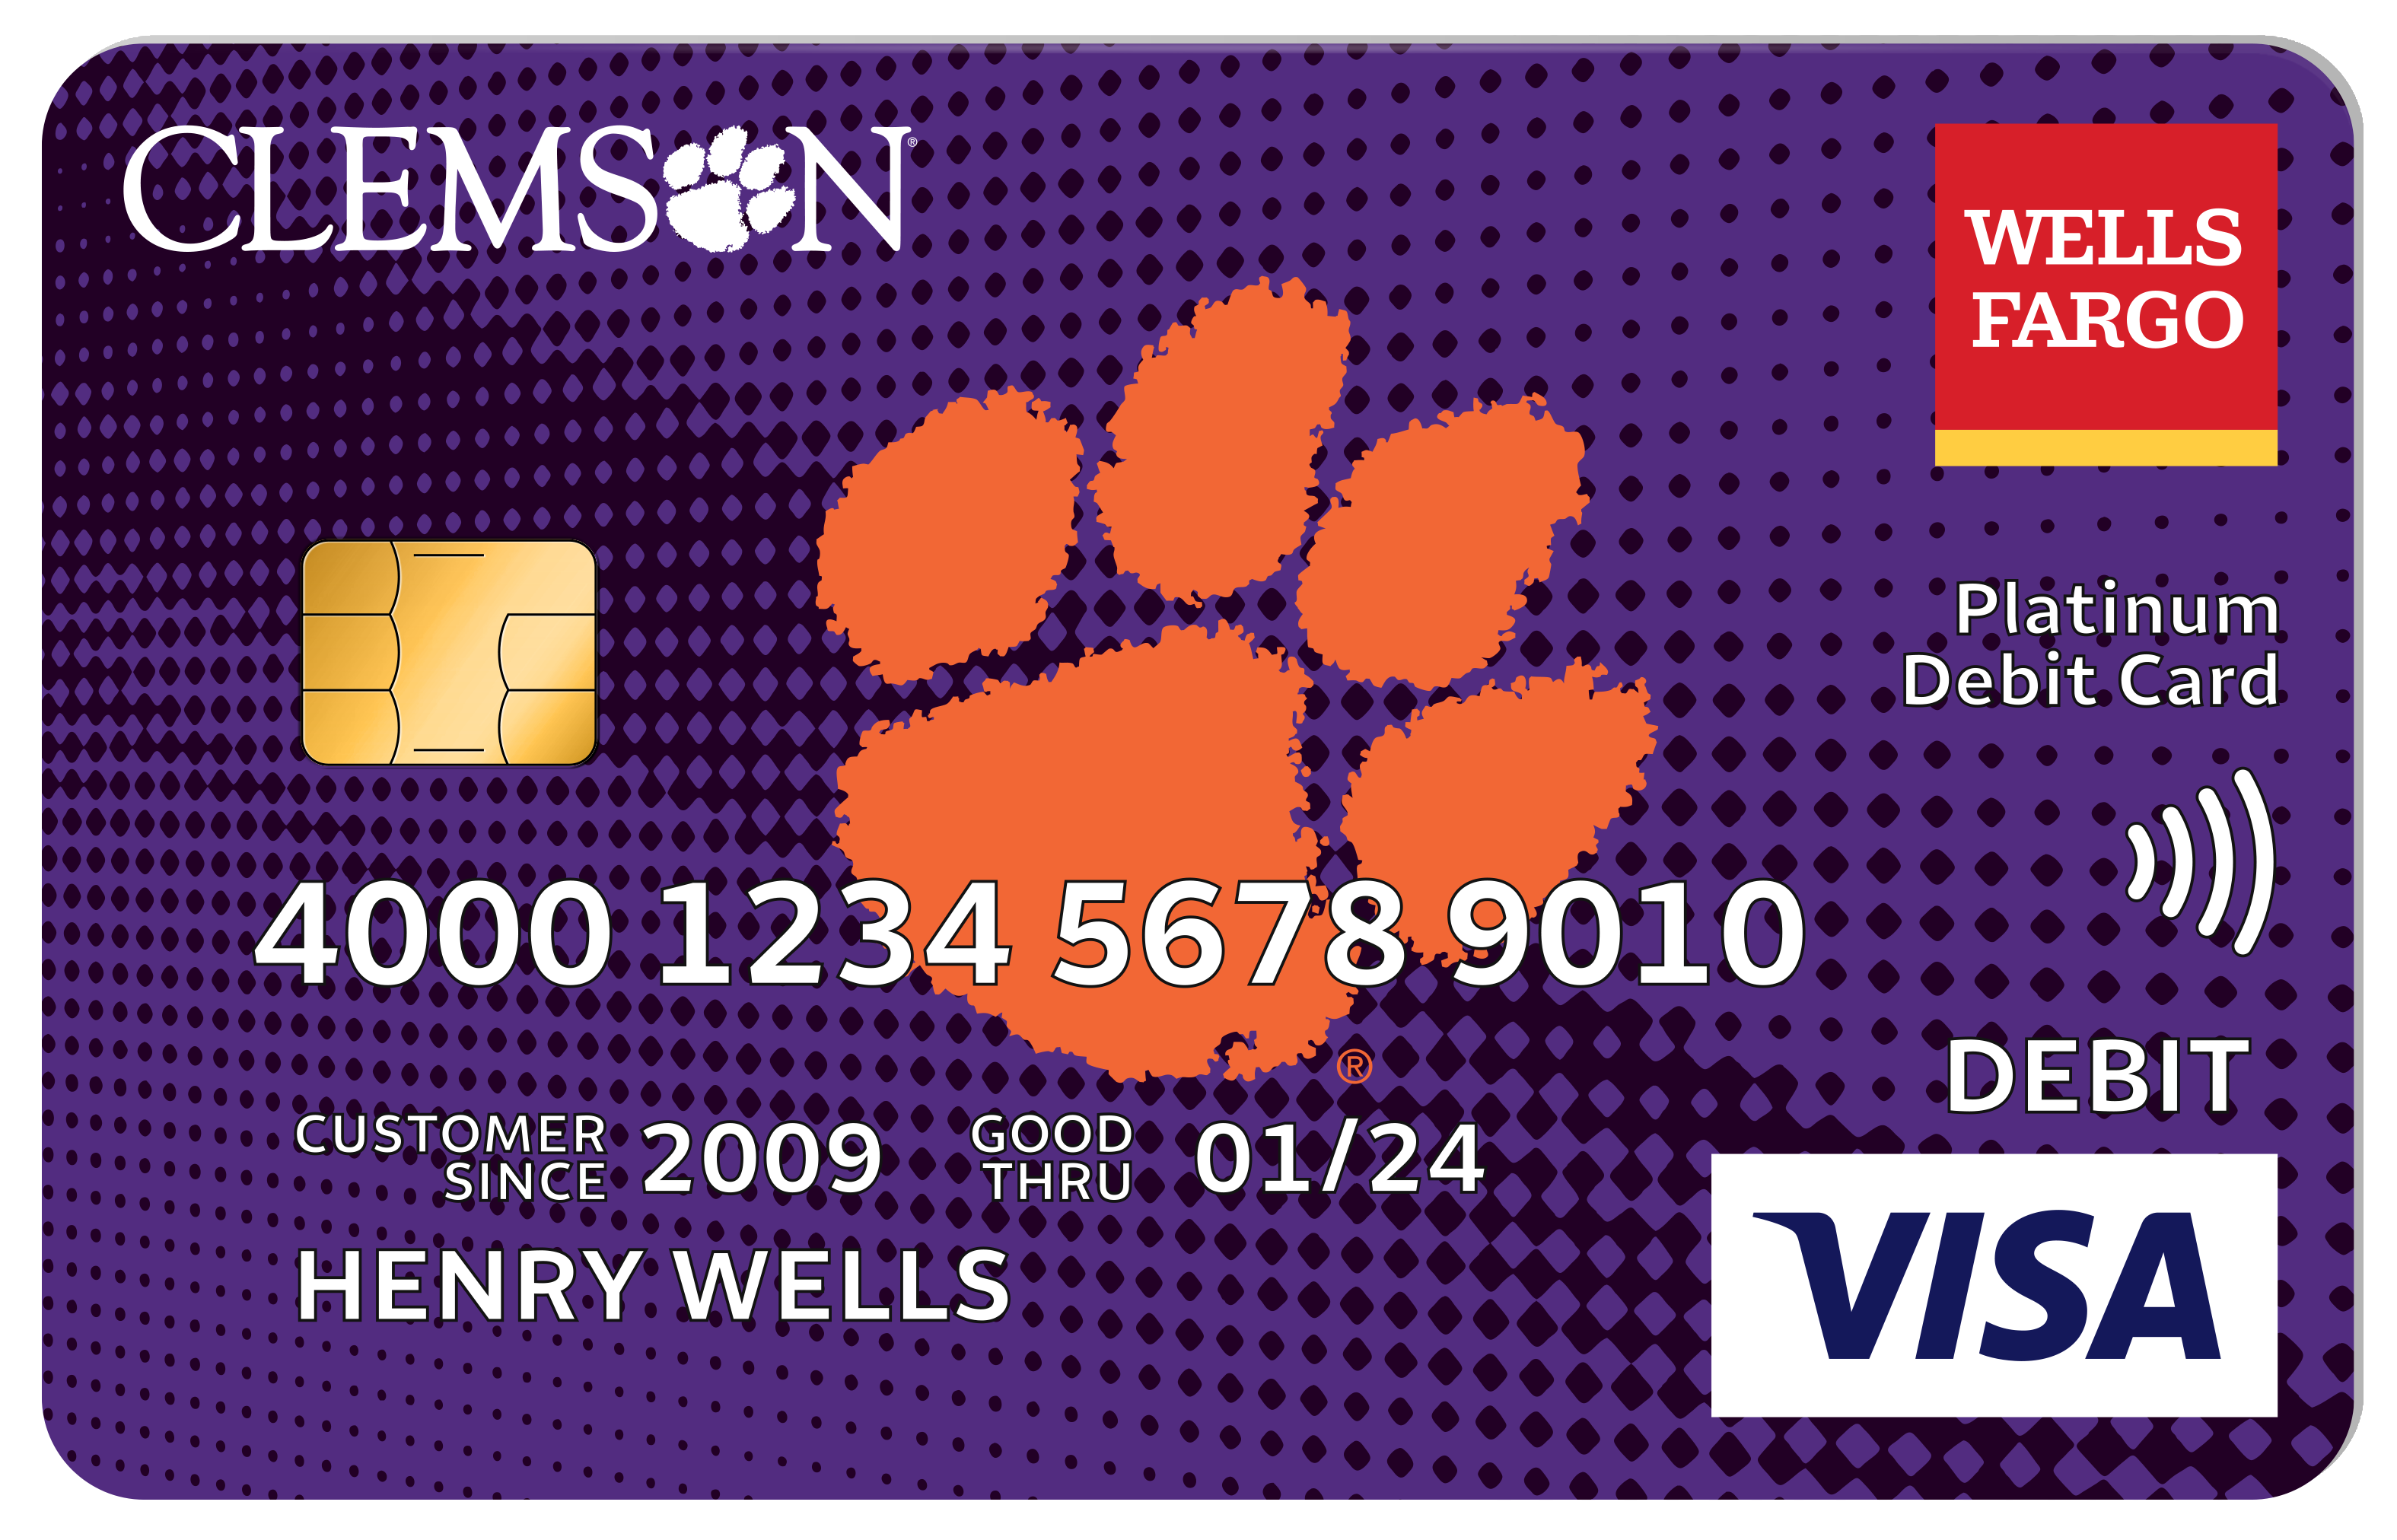 clemson-university-campus-affinity-debit-card-collateral-image_final.png